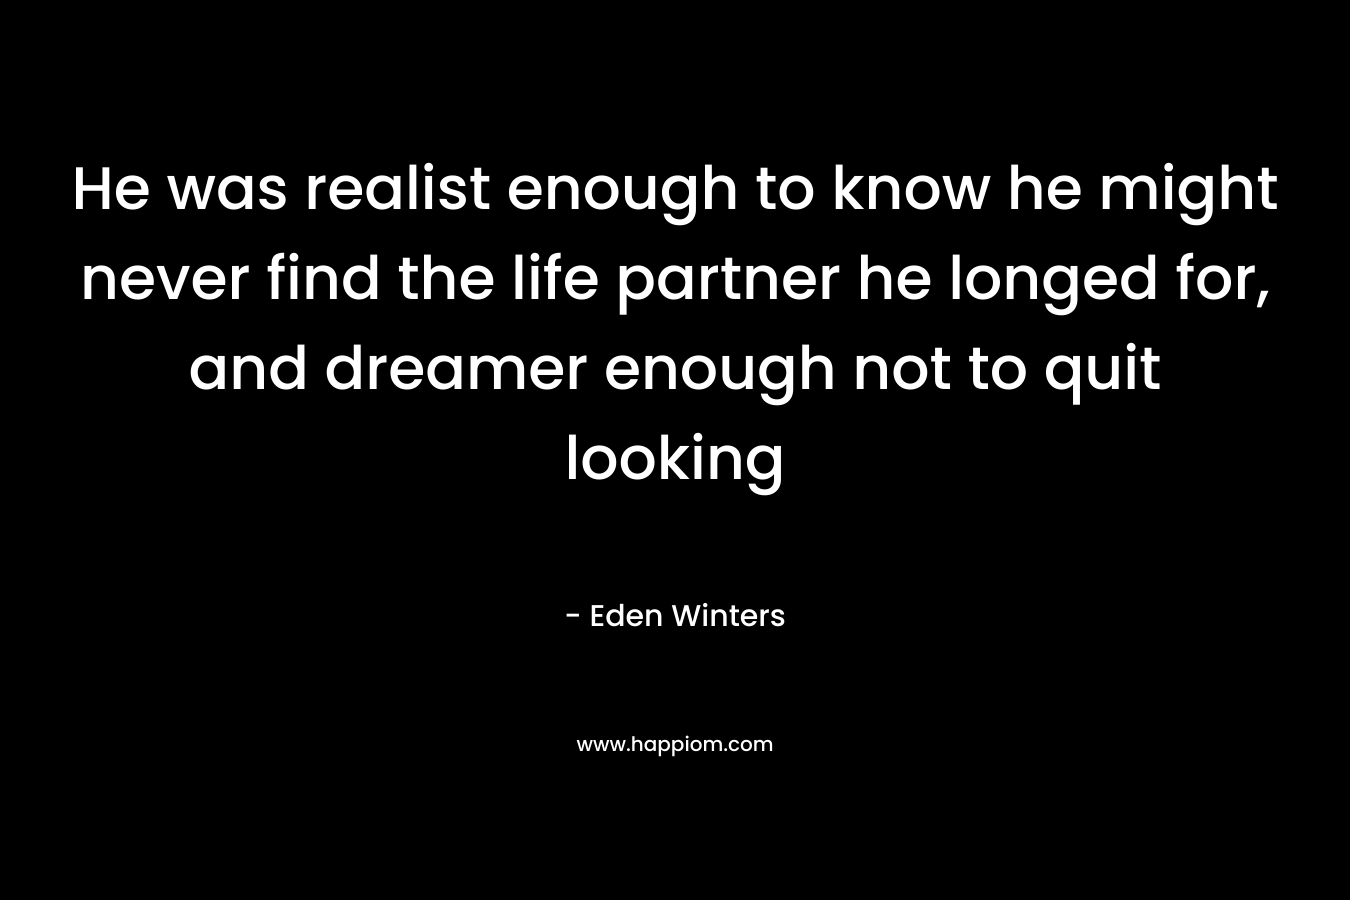 He was realist enough to know he might never find the life partner he longed for, and dreamer enough not to quit looking – Eden Winters